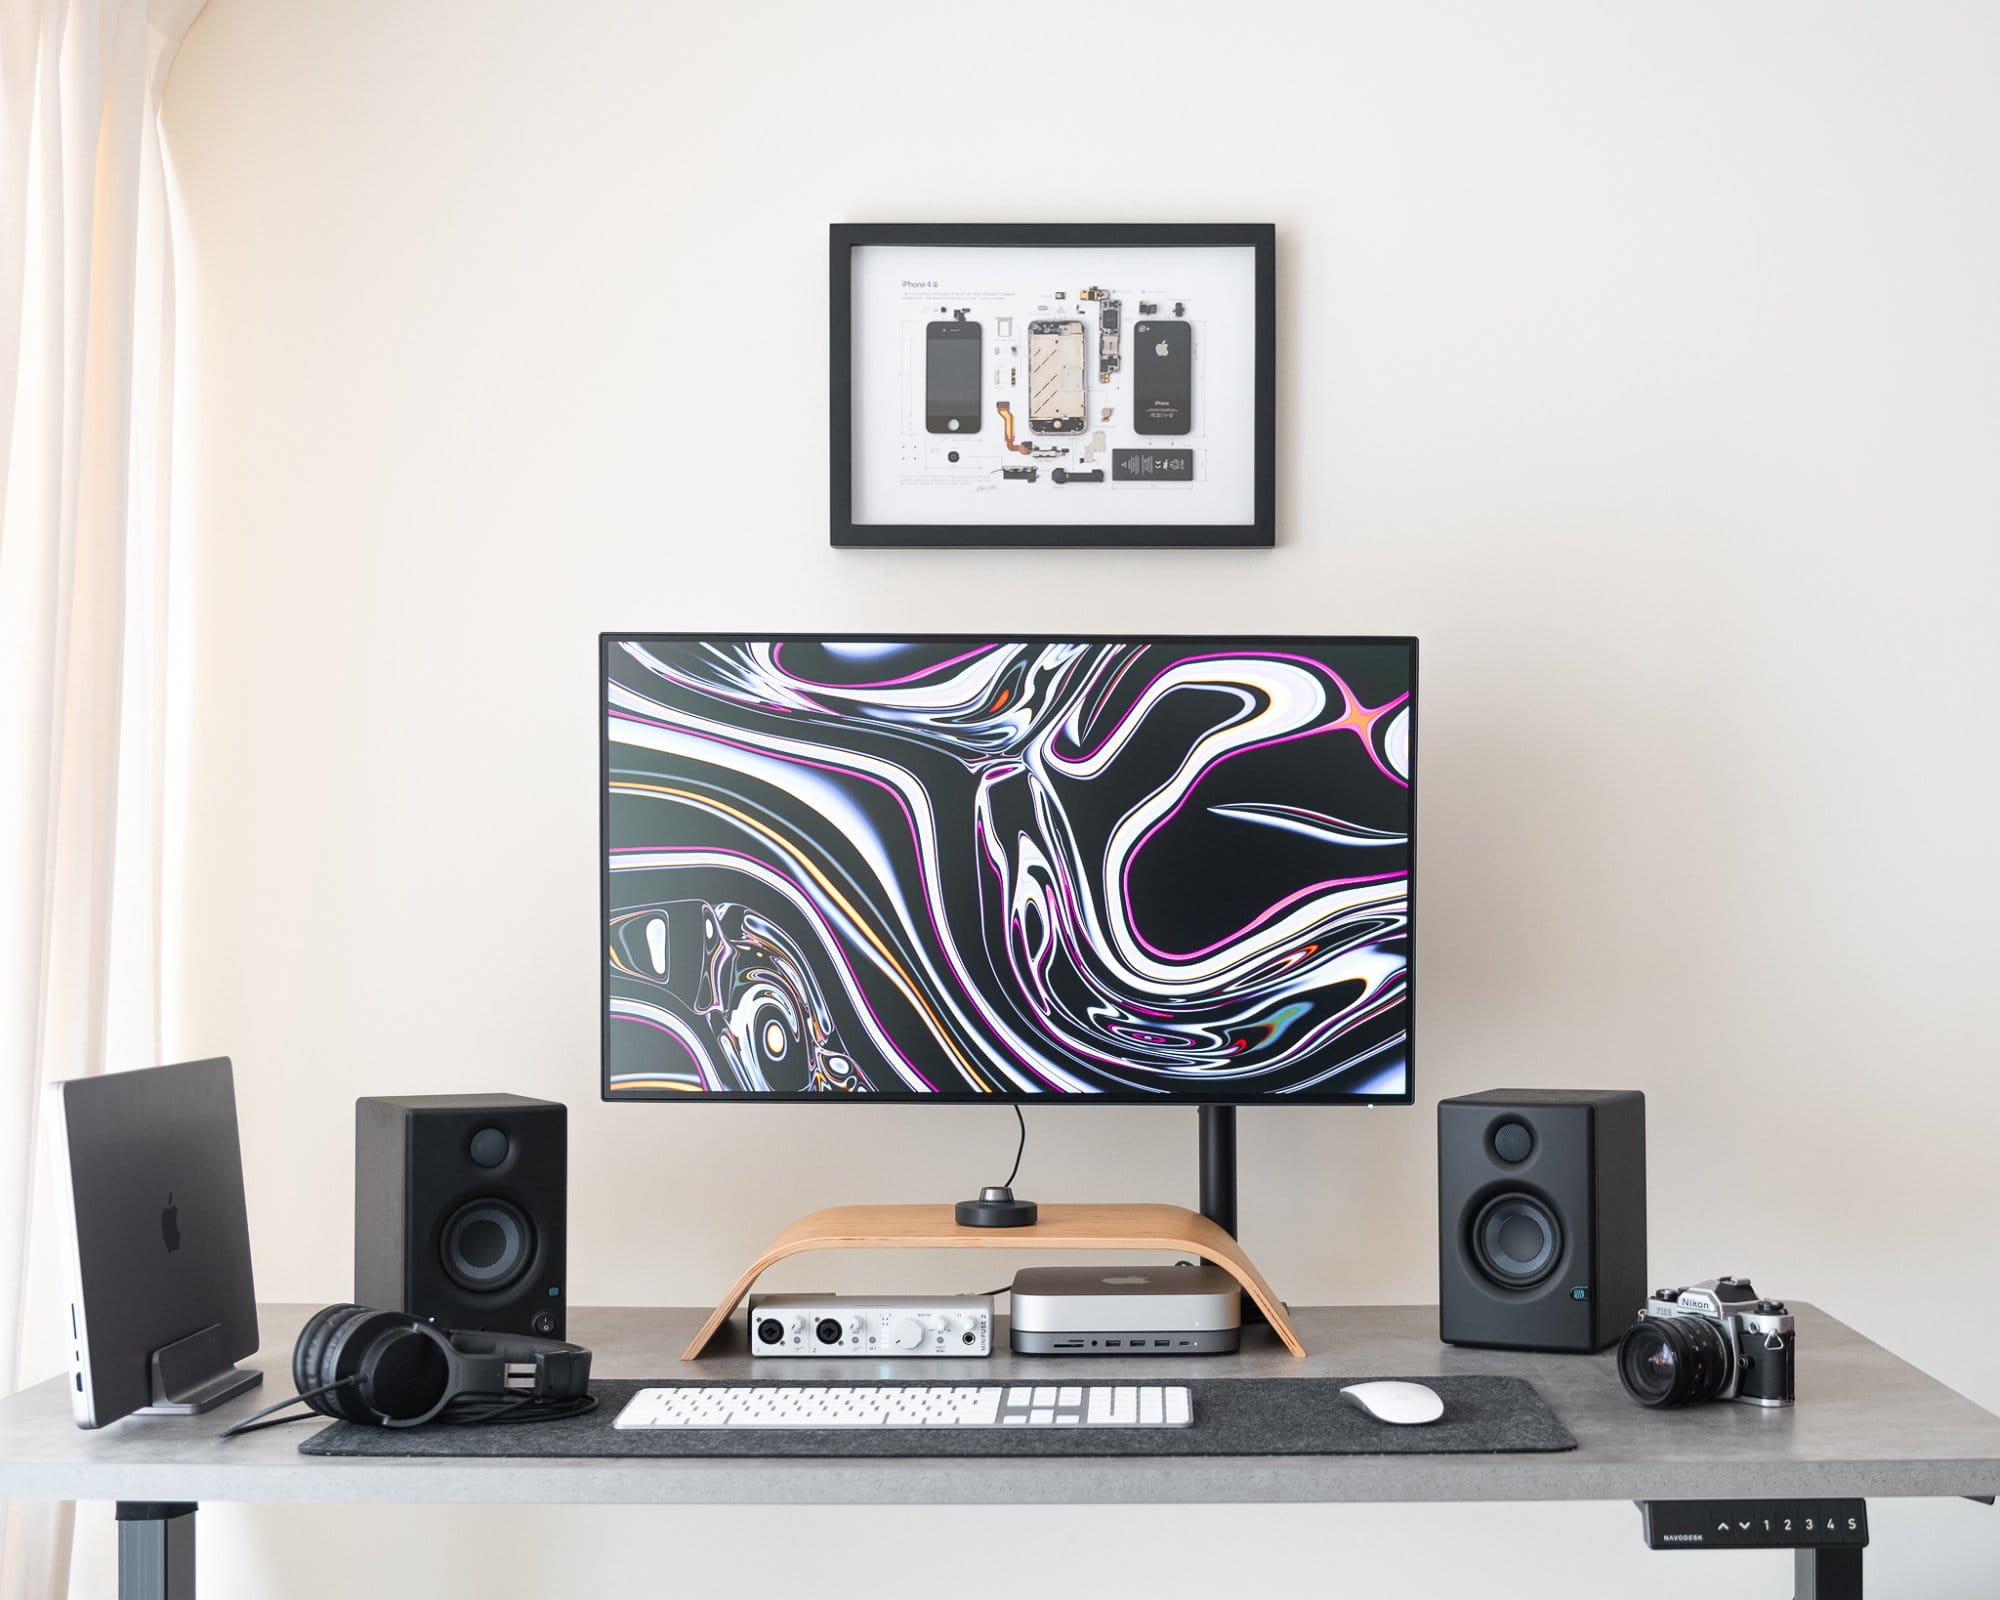 A contemporary desk setup featuring a large monitor with an abstract swirl screensaver, flanked by speakers, with a laptop, headphones, a vintage camera, and a framed diagram of a smartphone on the wall above